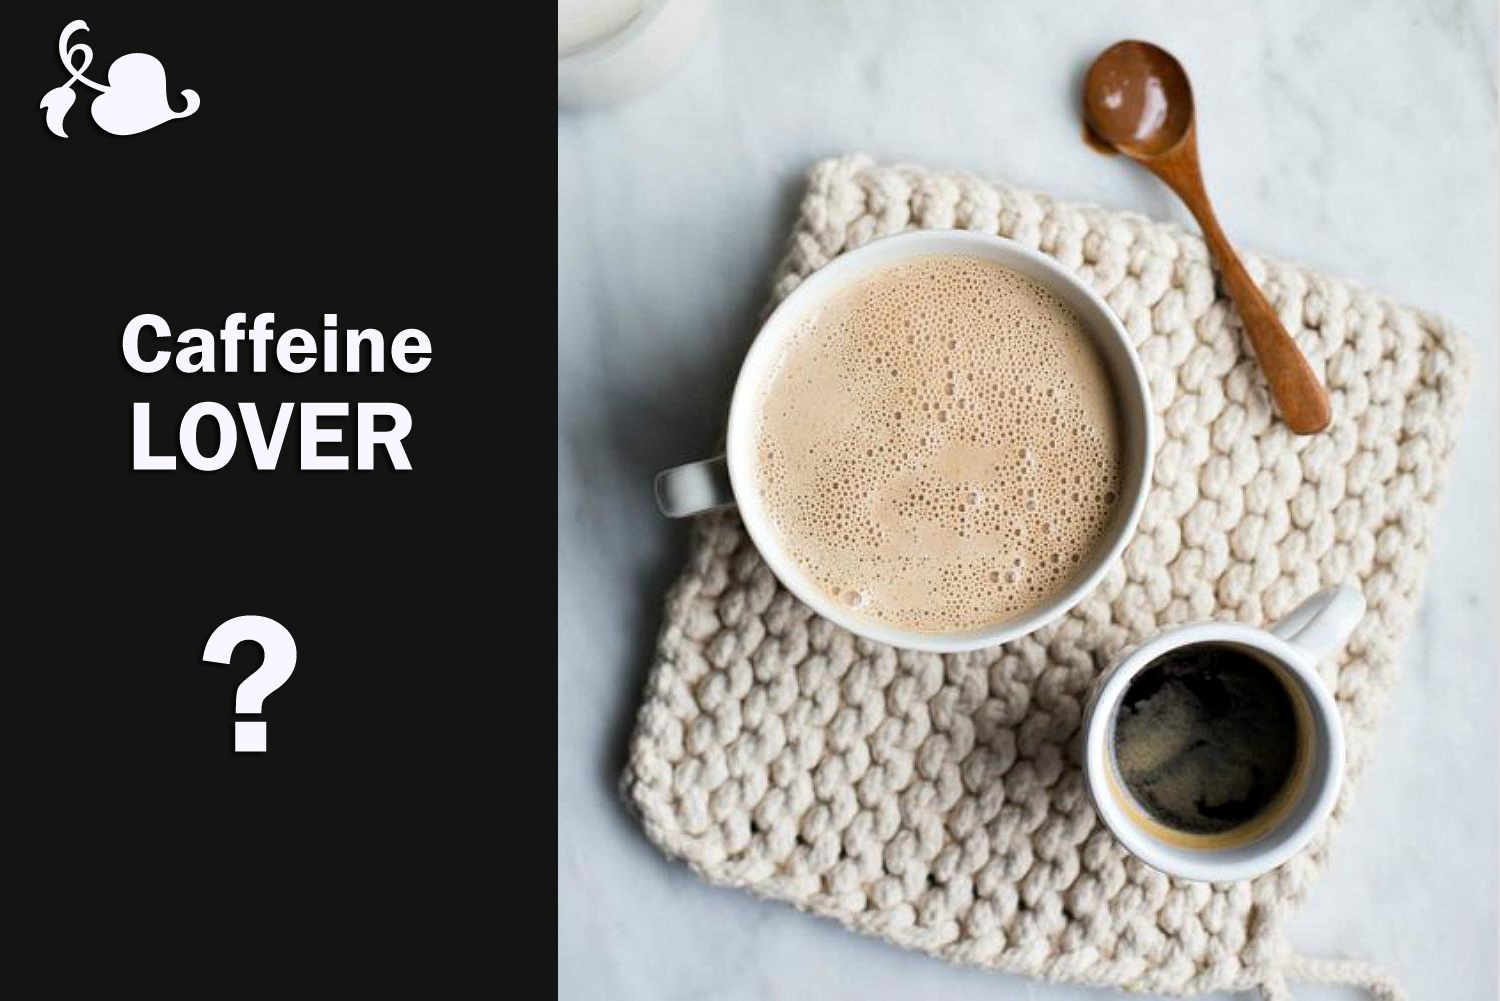 Caffeine Lover? This Article Will Close Your Bond!